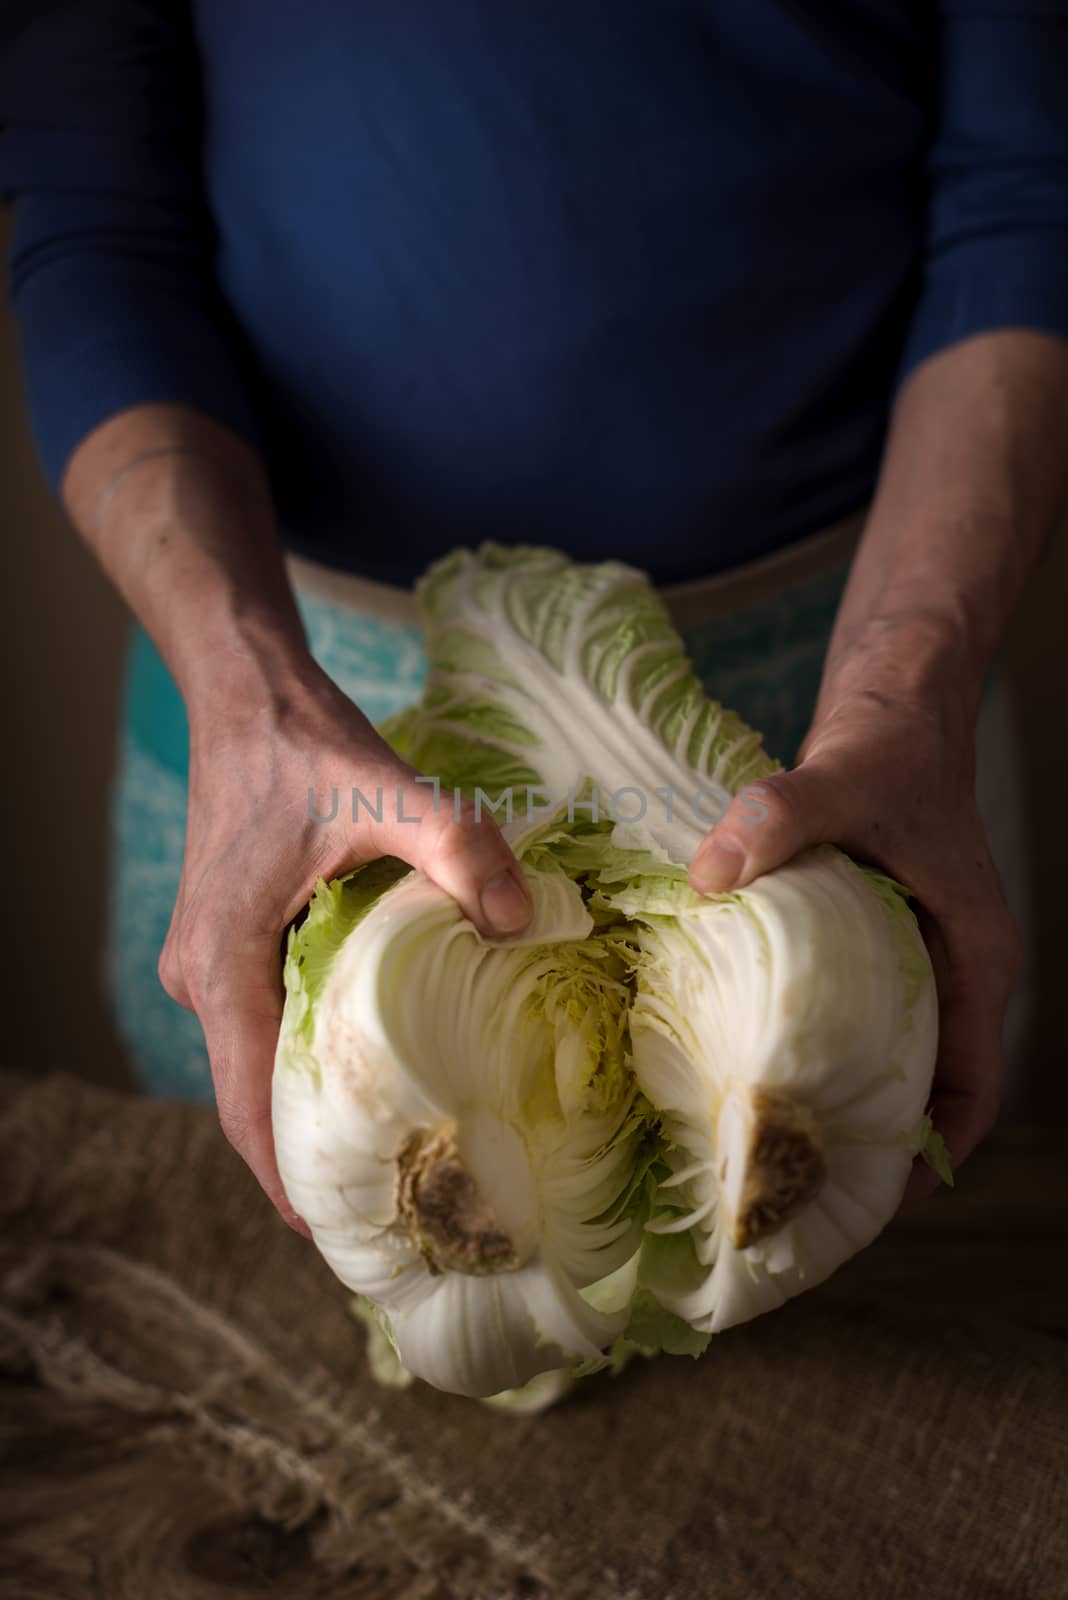 Woman shares the Chinese cabbage into two halves on the table vertical